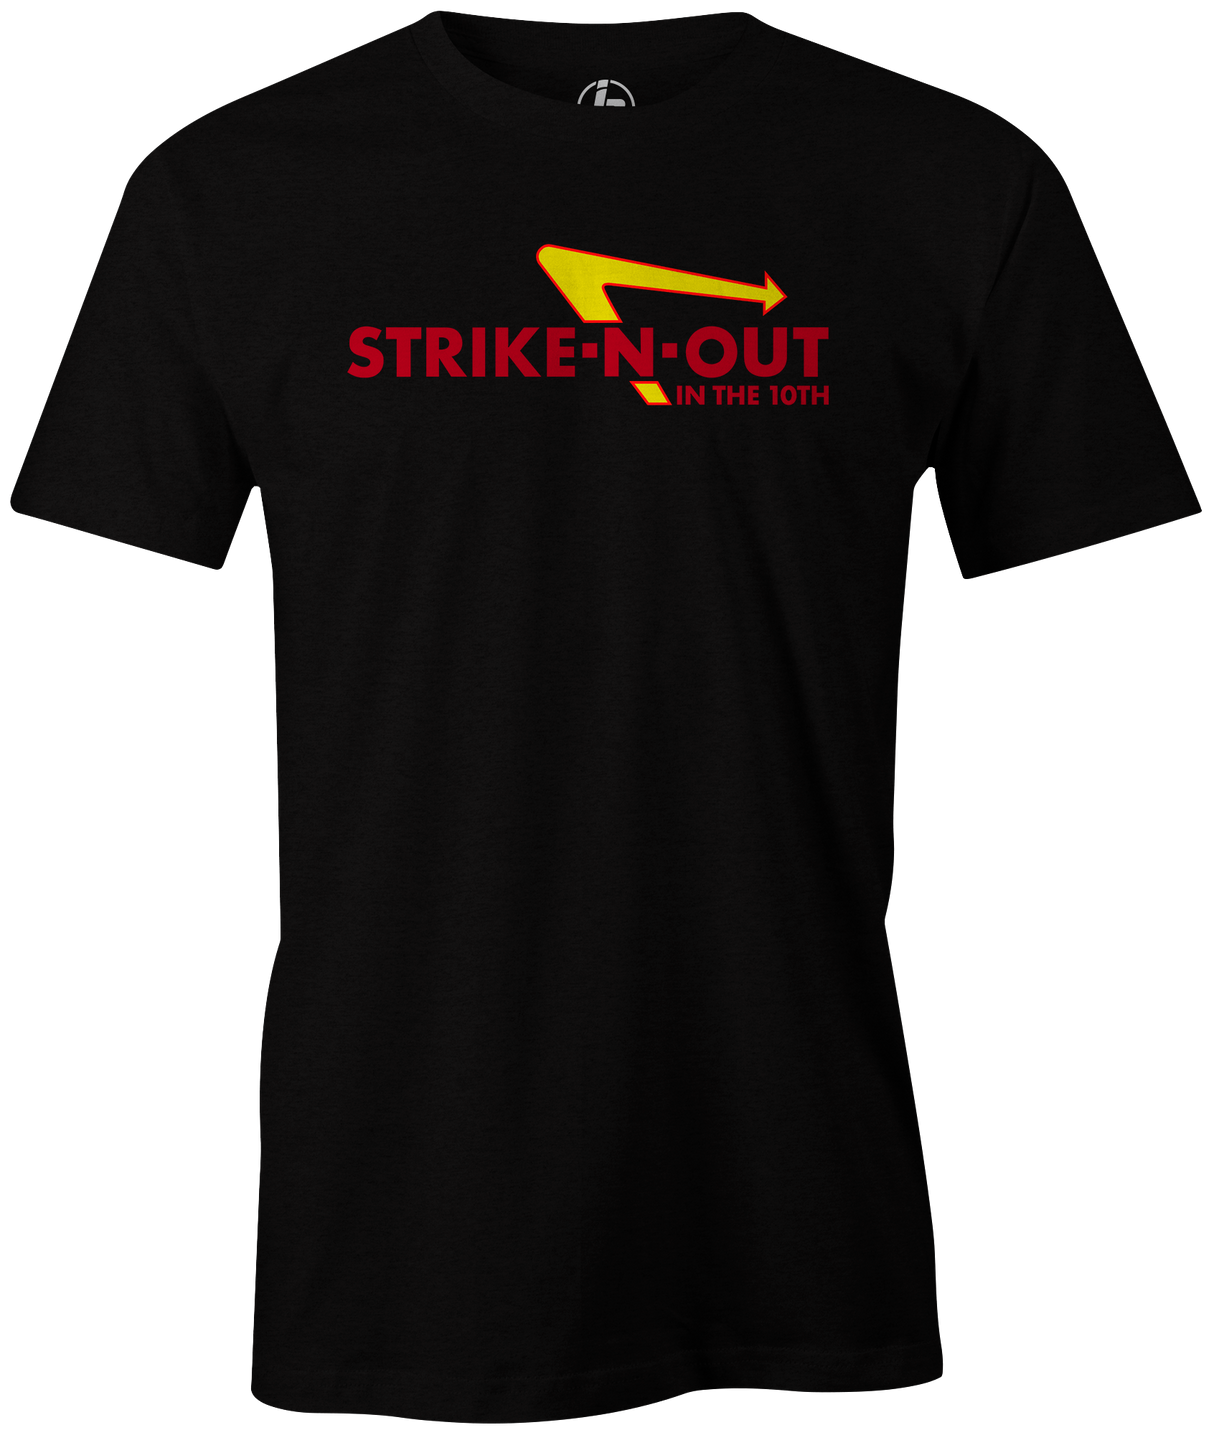 Strike-N-Out is where you want to be late in the game!  This funny, novelty tee is the perfect gift for any In-N-Out loving bowler. Bowl a league on Tuesday night? Snag this shirt and make it a late burger night! T-shirt, tee, tee-shirt, tee shirt, tshirt. Taco bell. League bowling team shirt. white